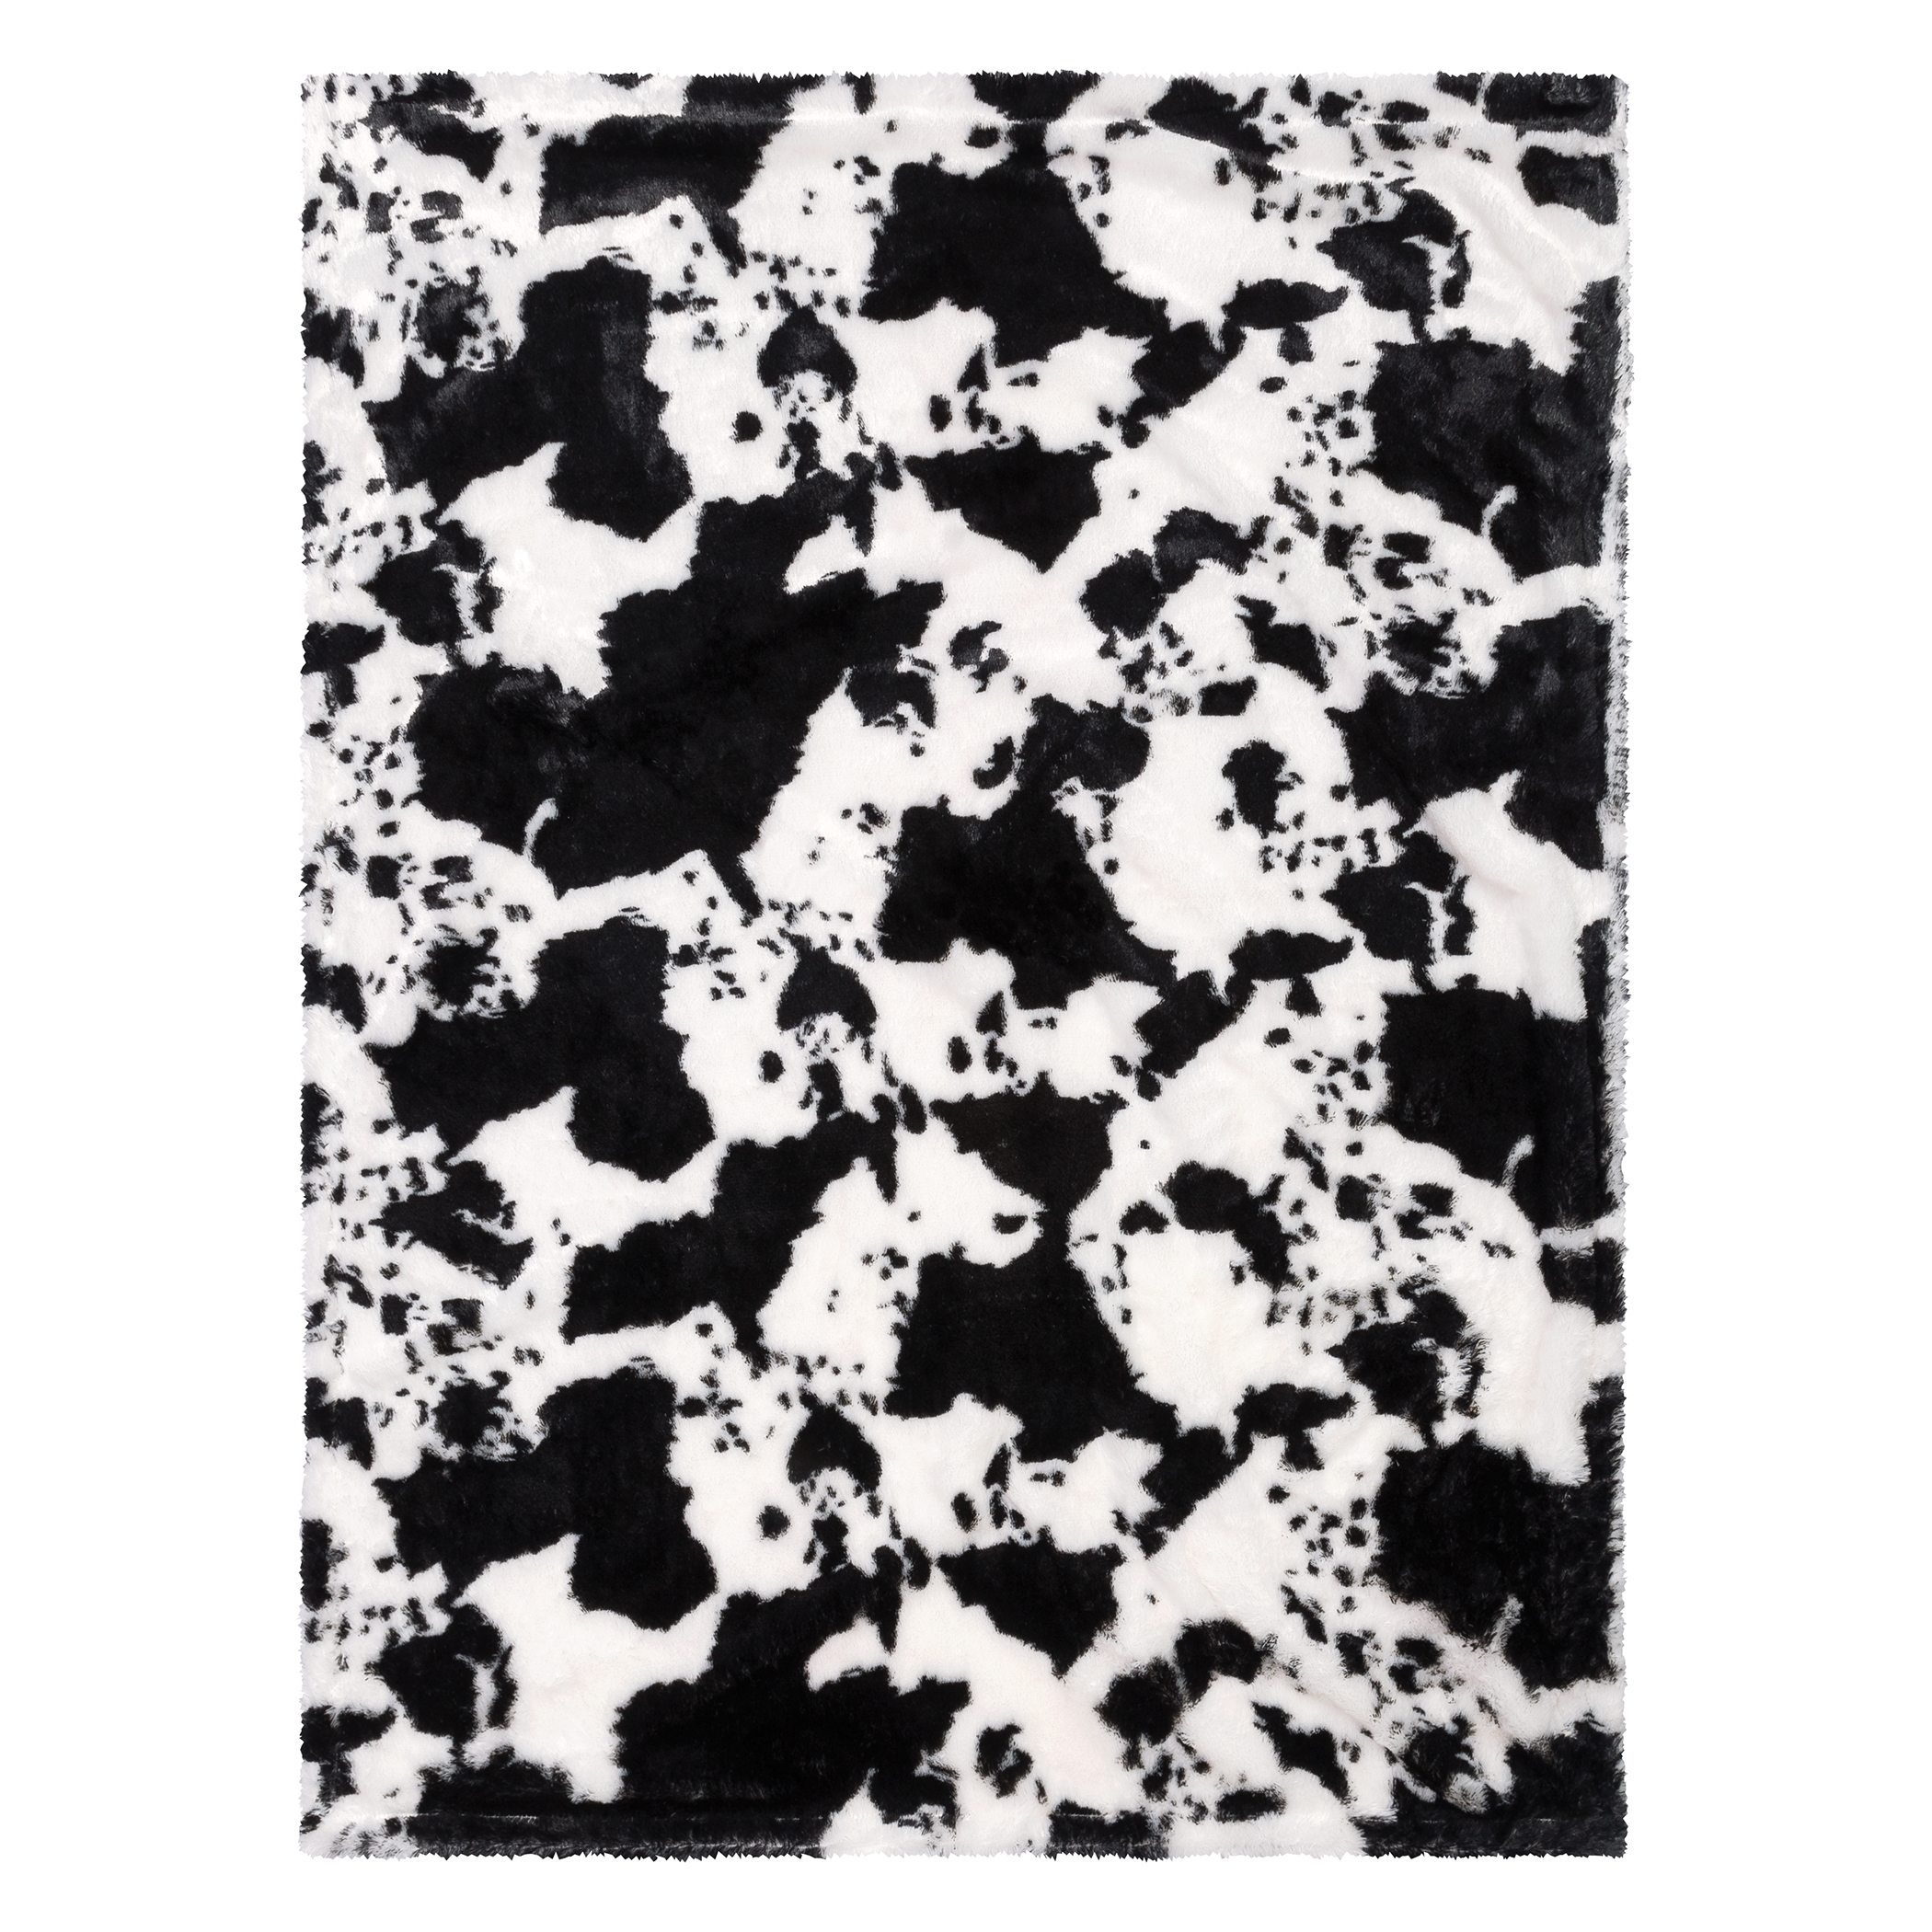 Trend Lab Cow Print Plush Black Polyester Baby Blanket - image 3 of 5